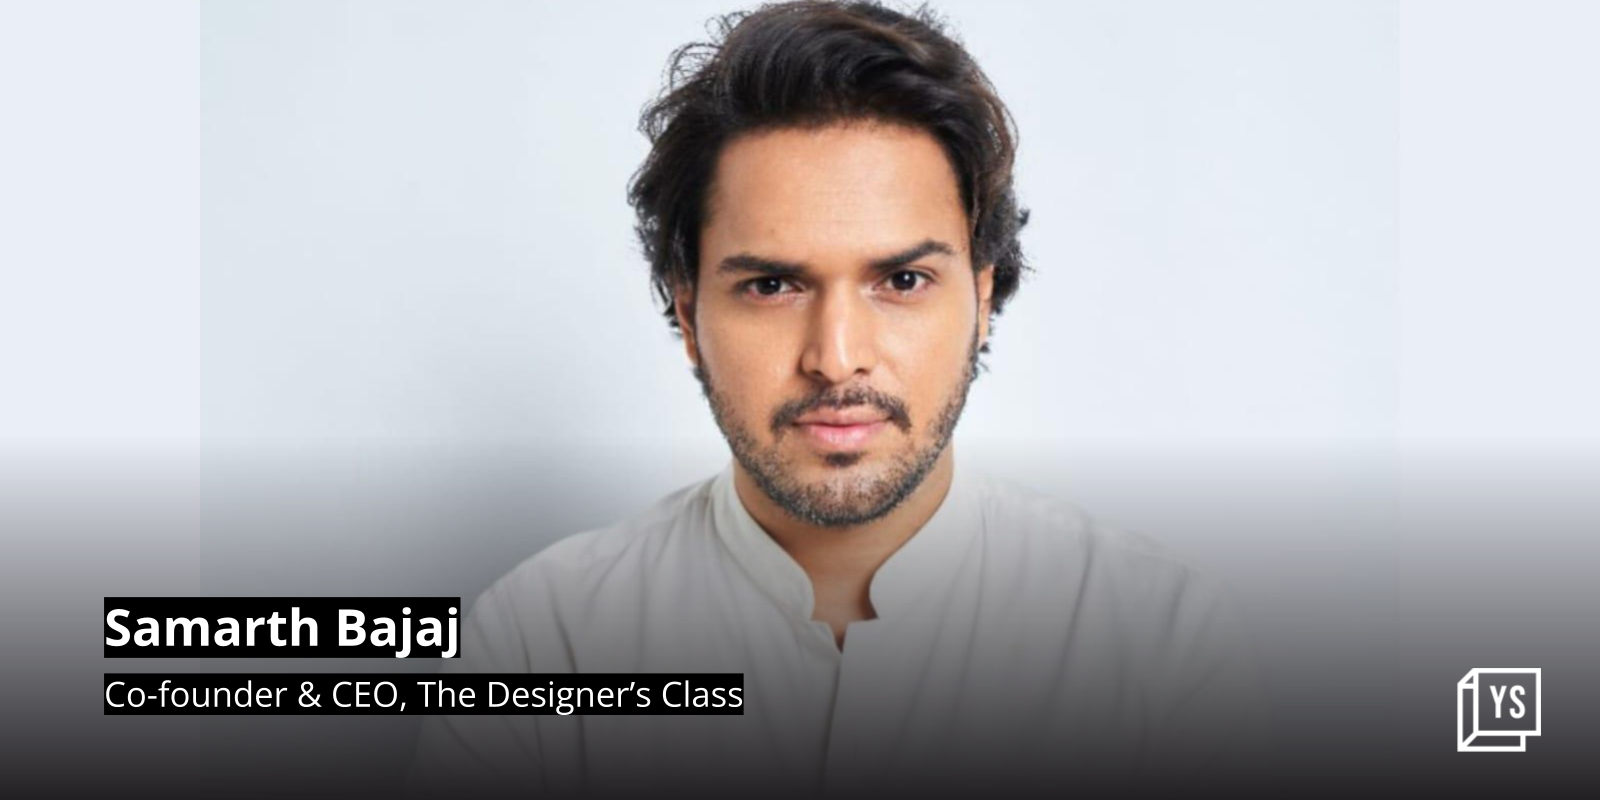 The Designer Class bet on celebrities and expert-curated courses to make upskilling accessible